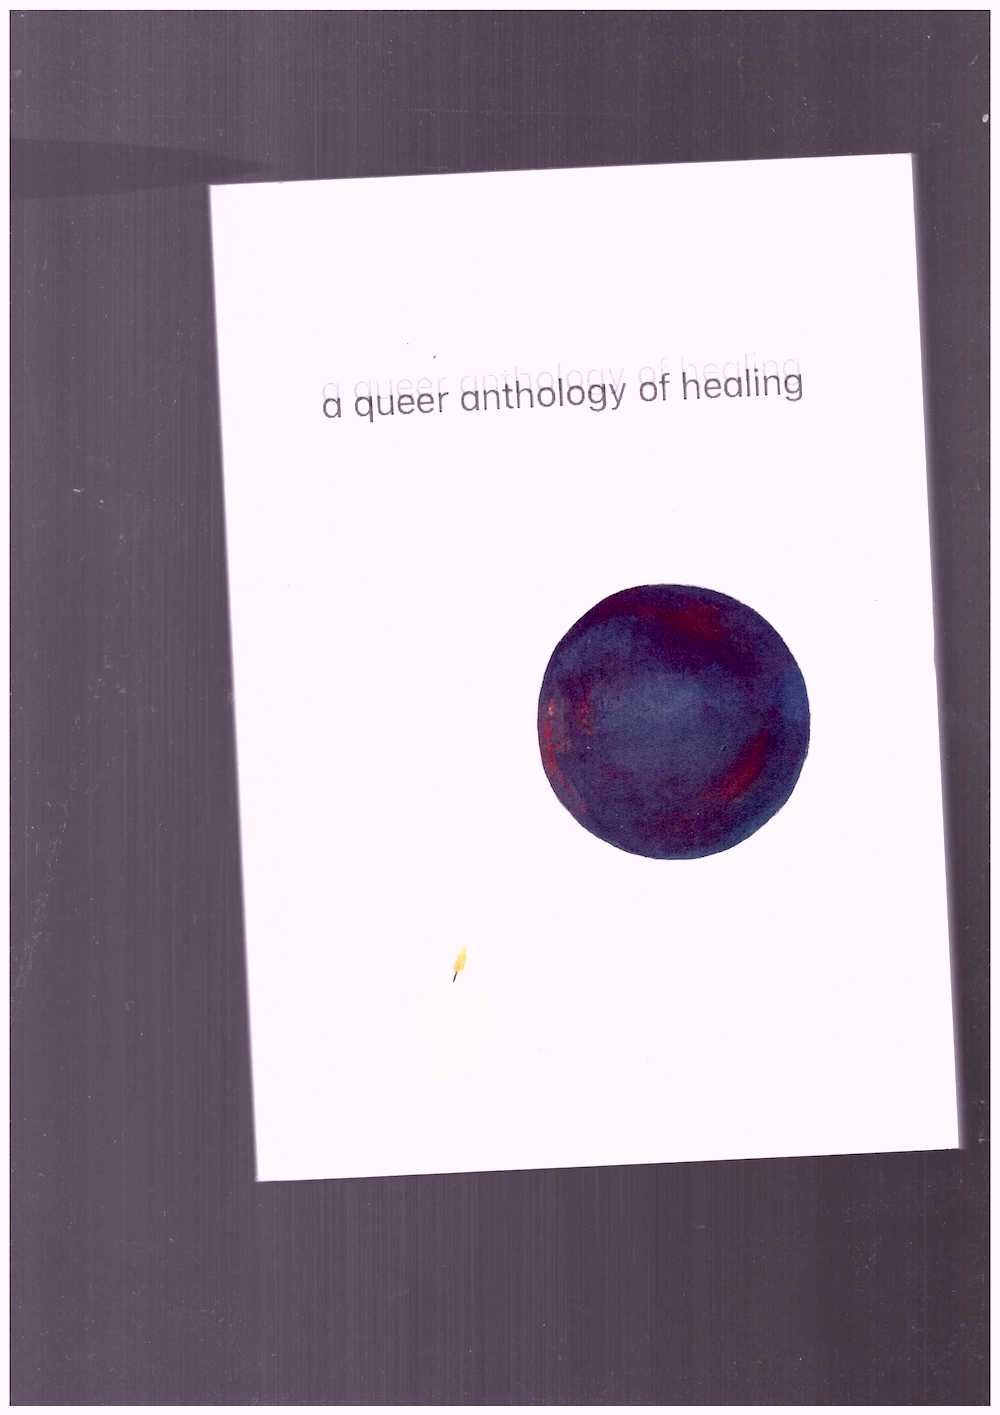 PORTER, Richard (ed.) - A Queer Anthology of Healing